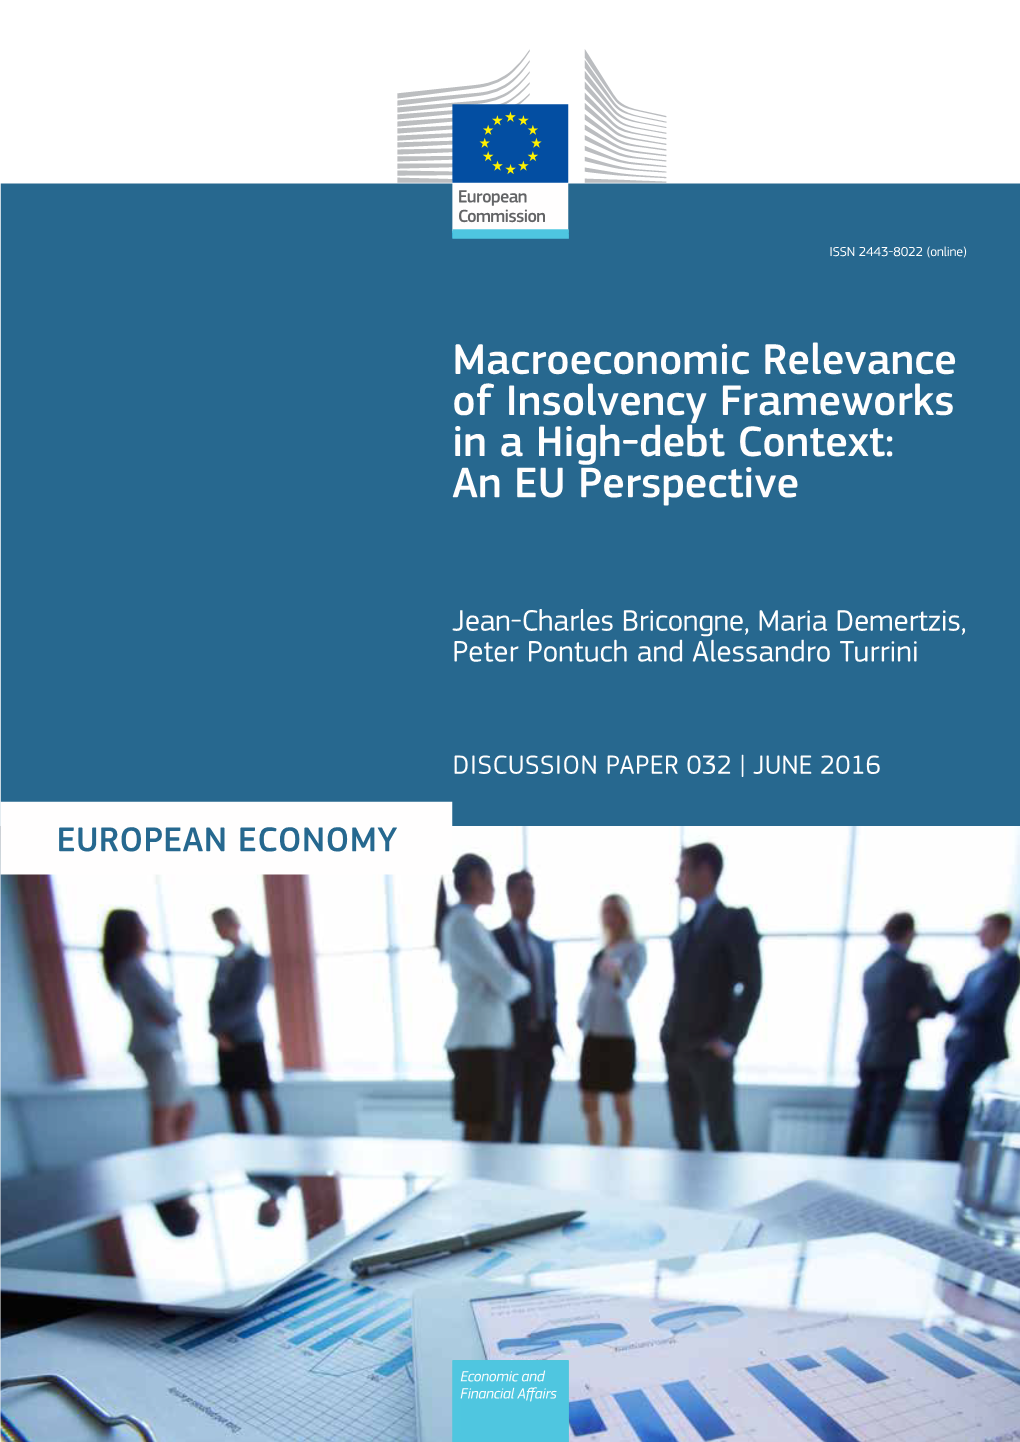 Macroeconomic Relevance of Insolvency Frameworks in a High-Debt Context: an EU Perspective